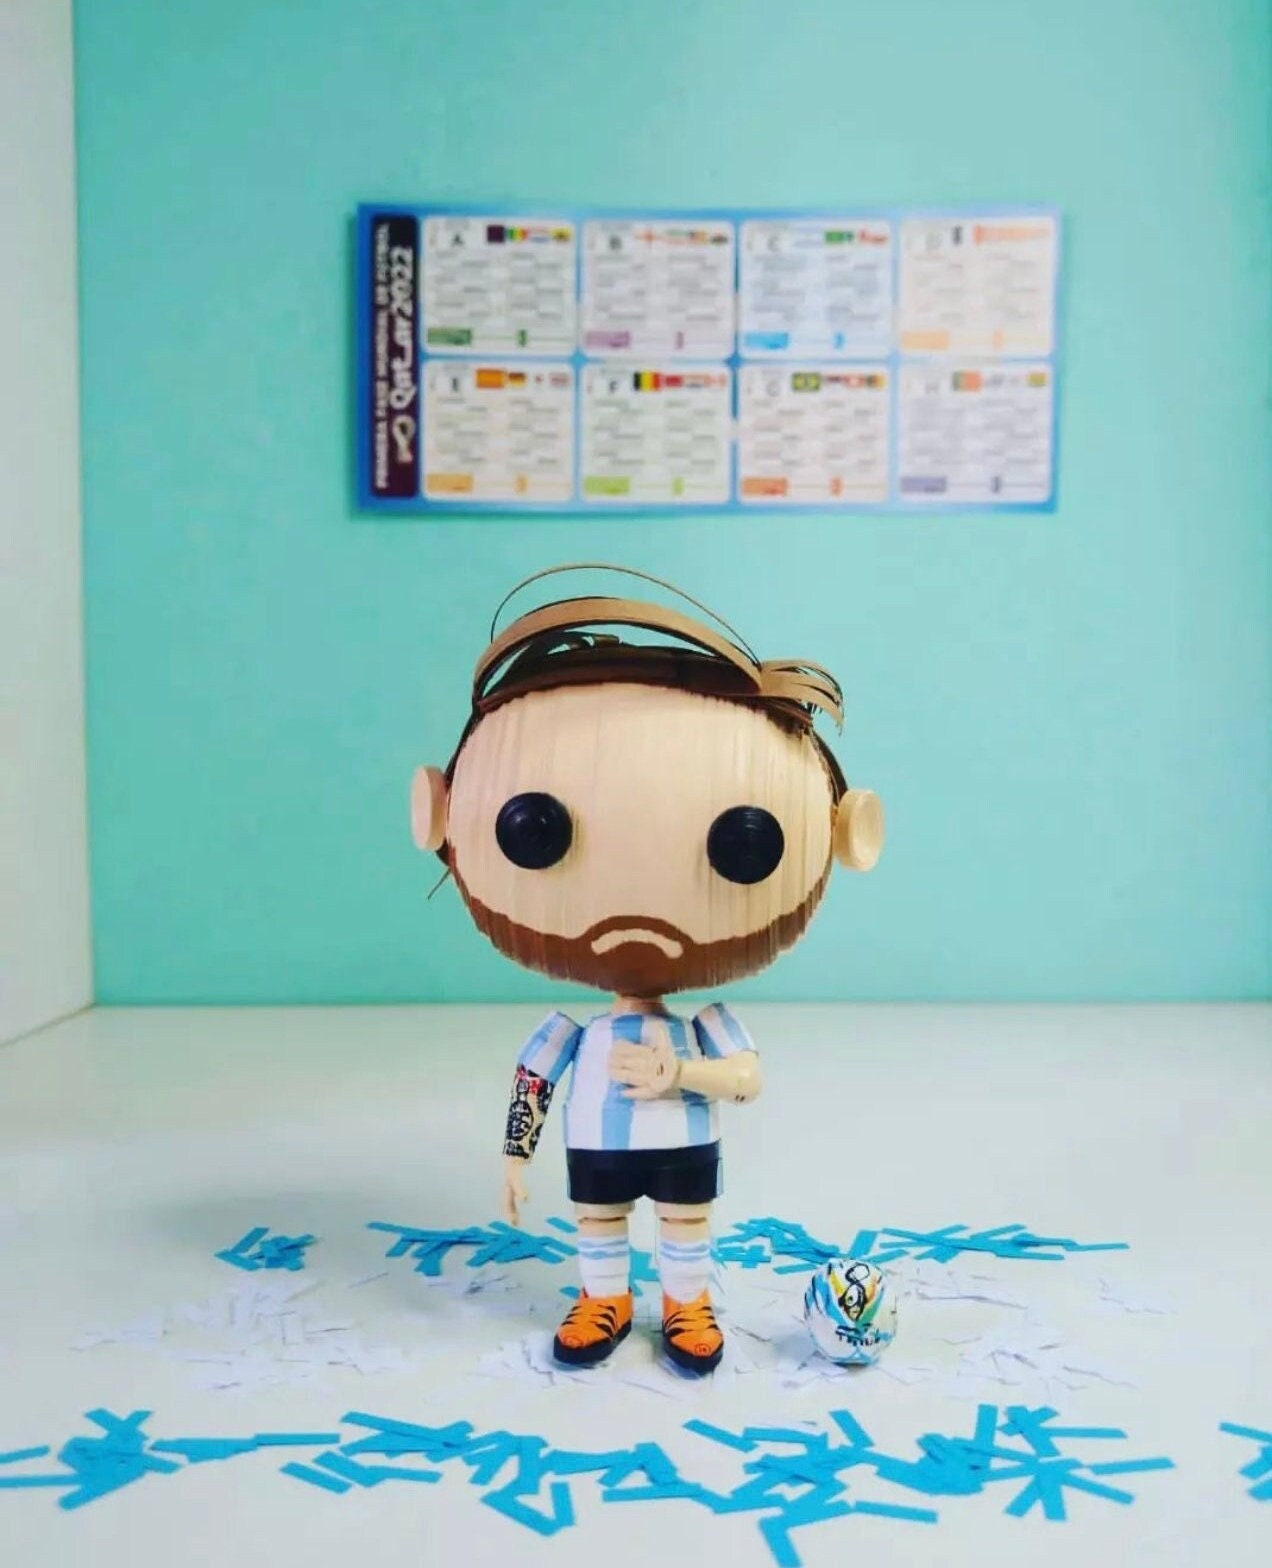 Messi Funko POP Style NEW custom Argentina With the Cup